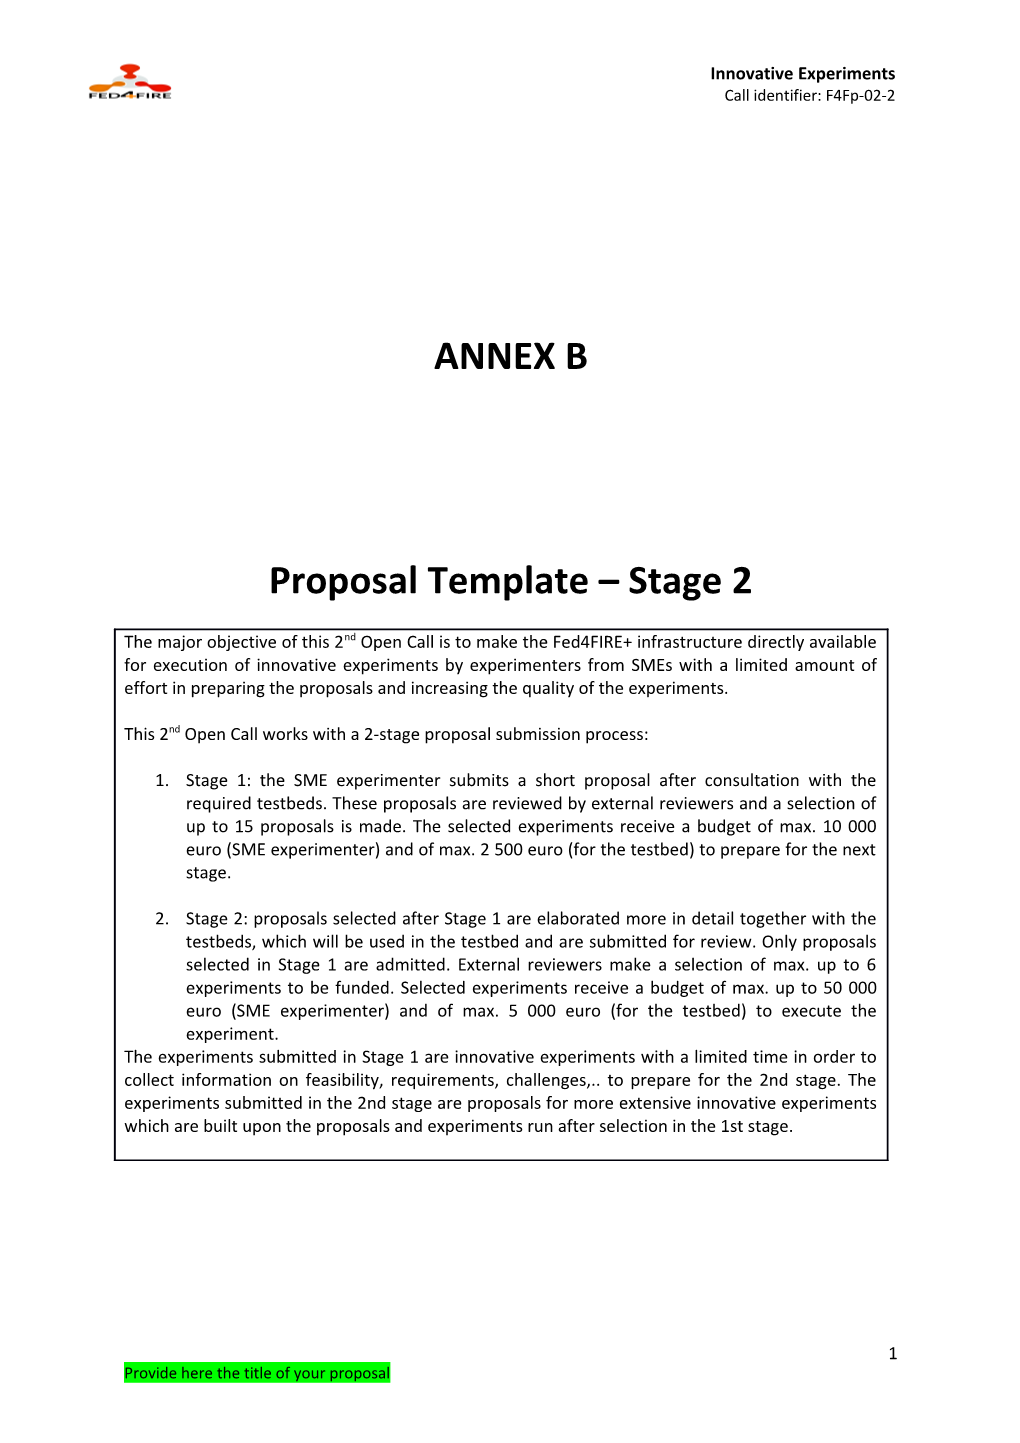 Proposal Template Stage 2